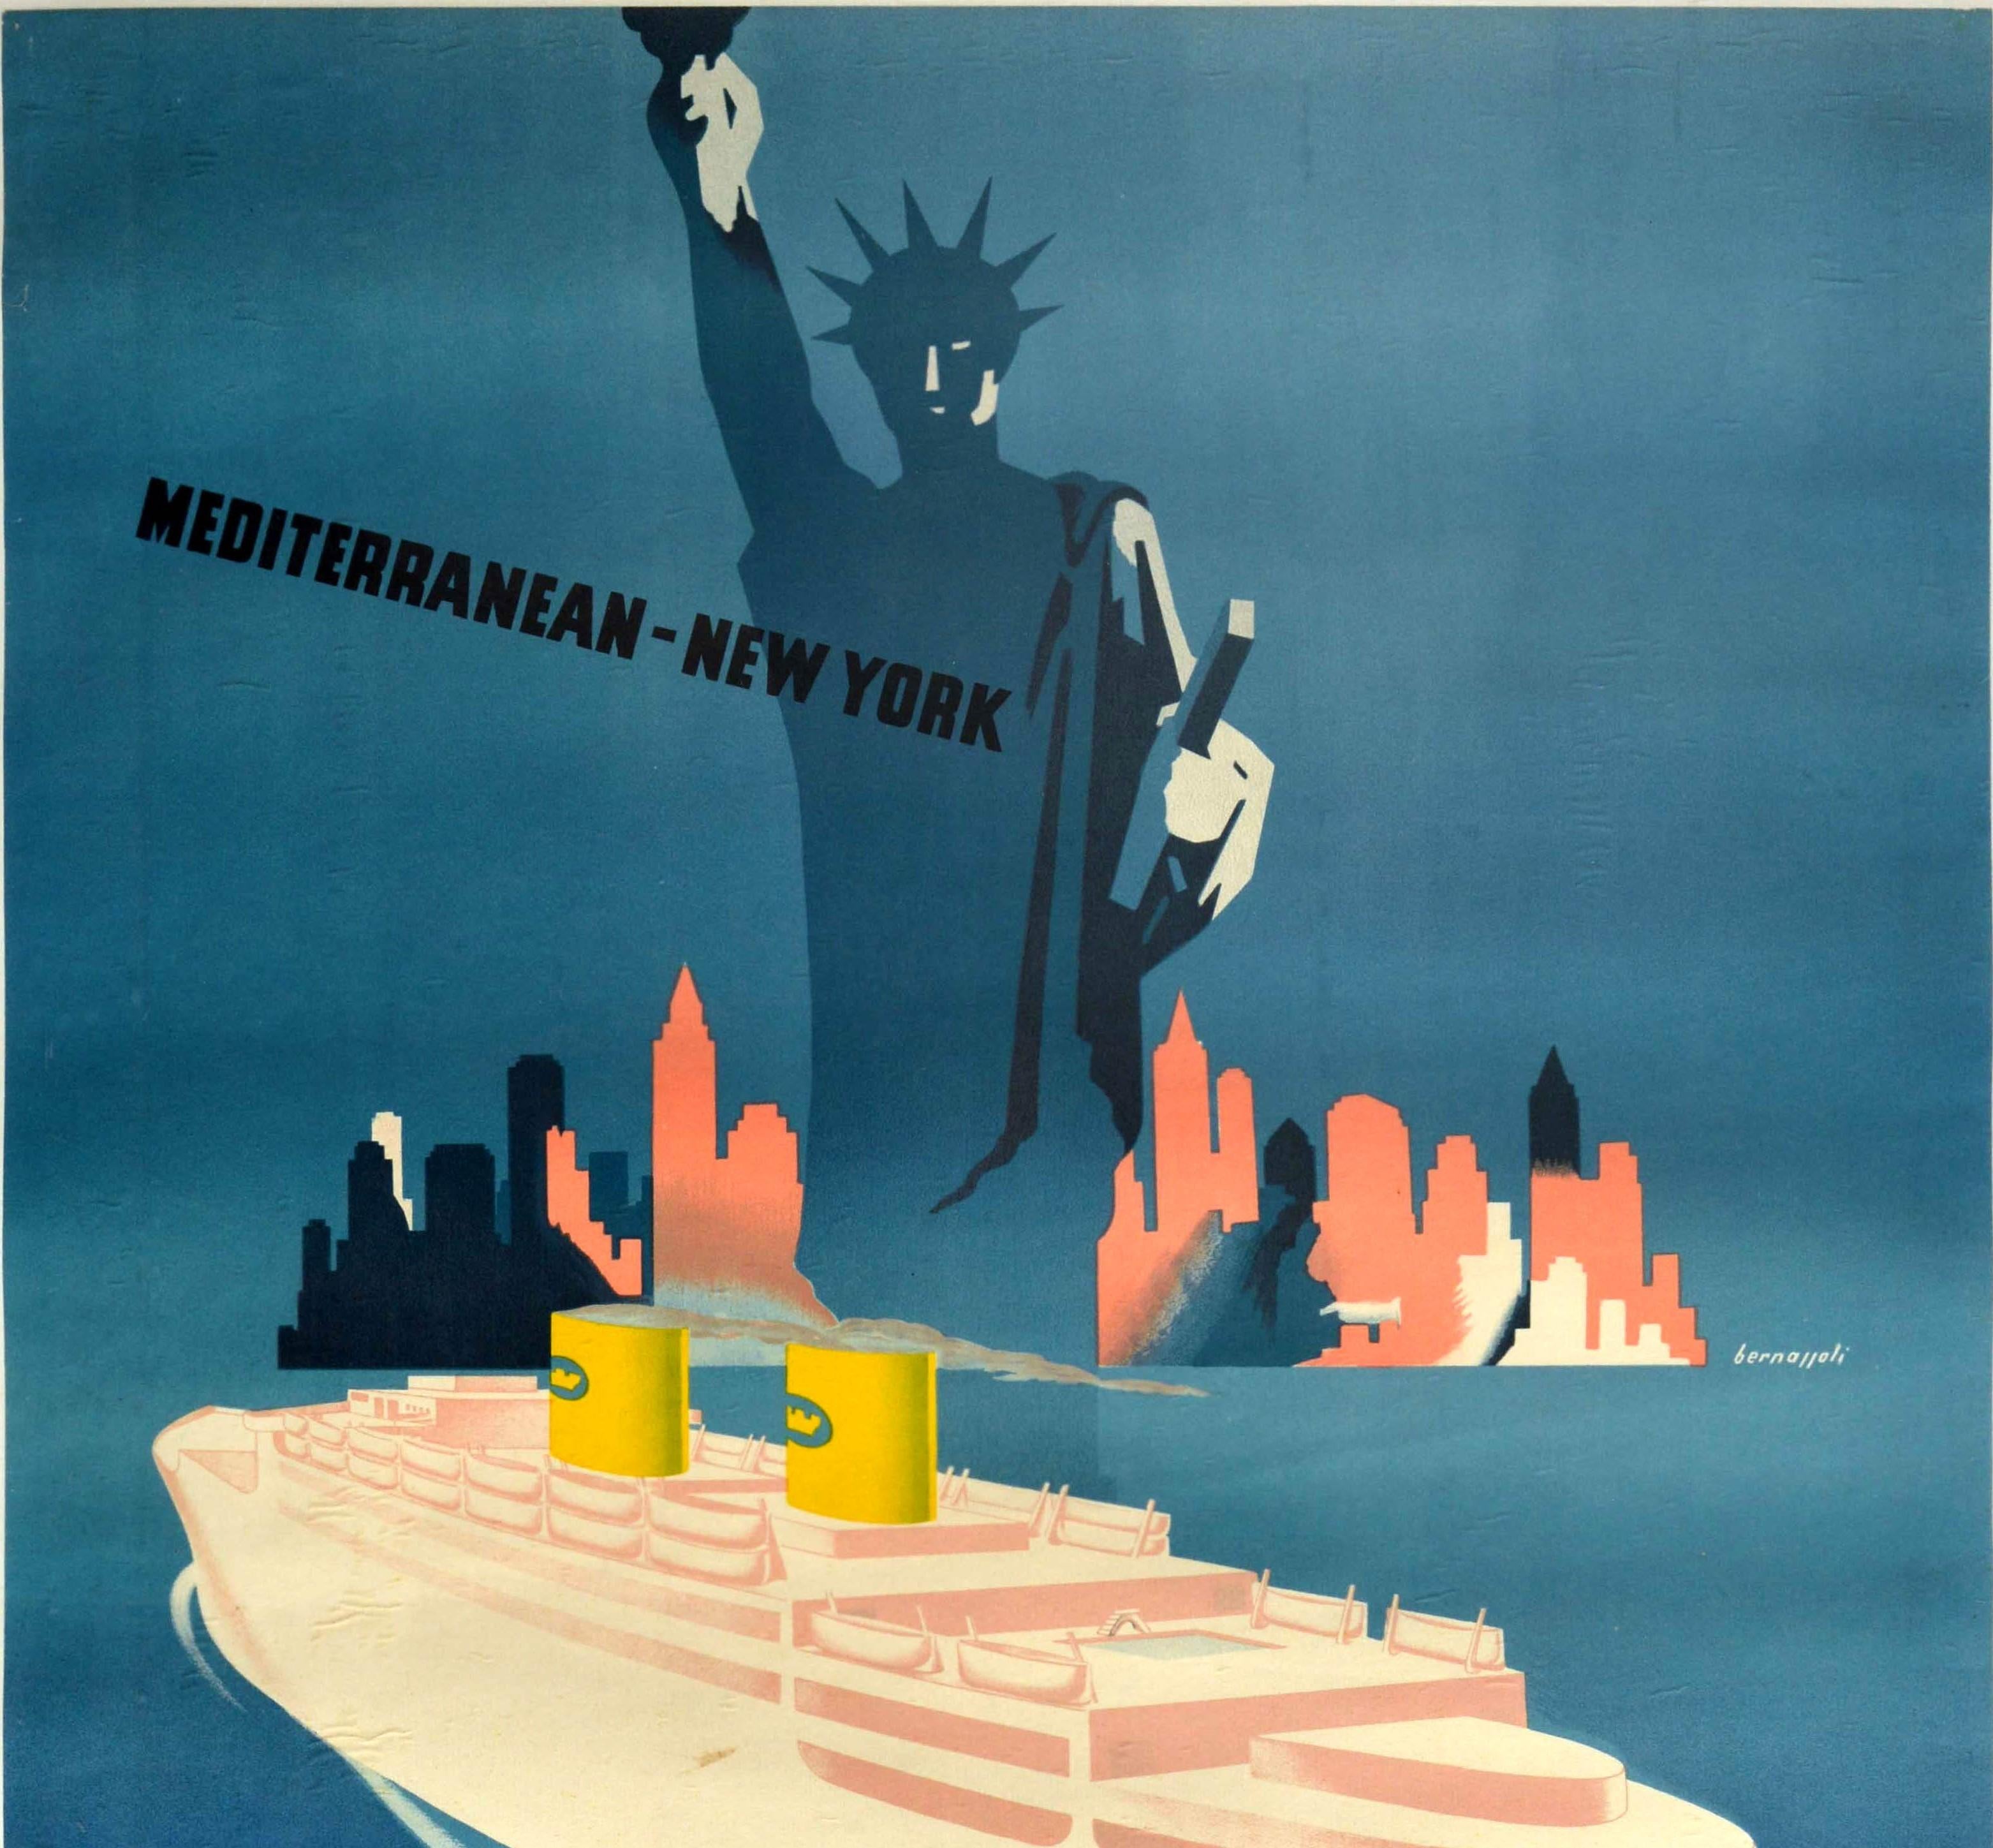 Original vintage cruise ship travel advertising poster, Mediterranean New York MS Italia - featuring a great illustration of a cruise liner in shades of pale pink and white with two yellow funnels and the diving board on the swimming pool deck